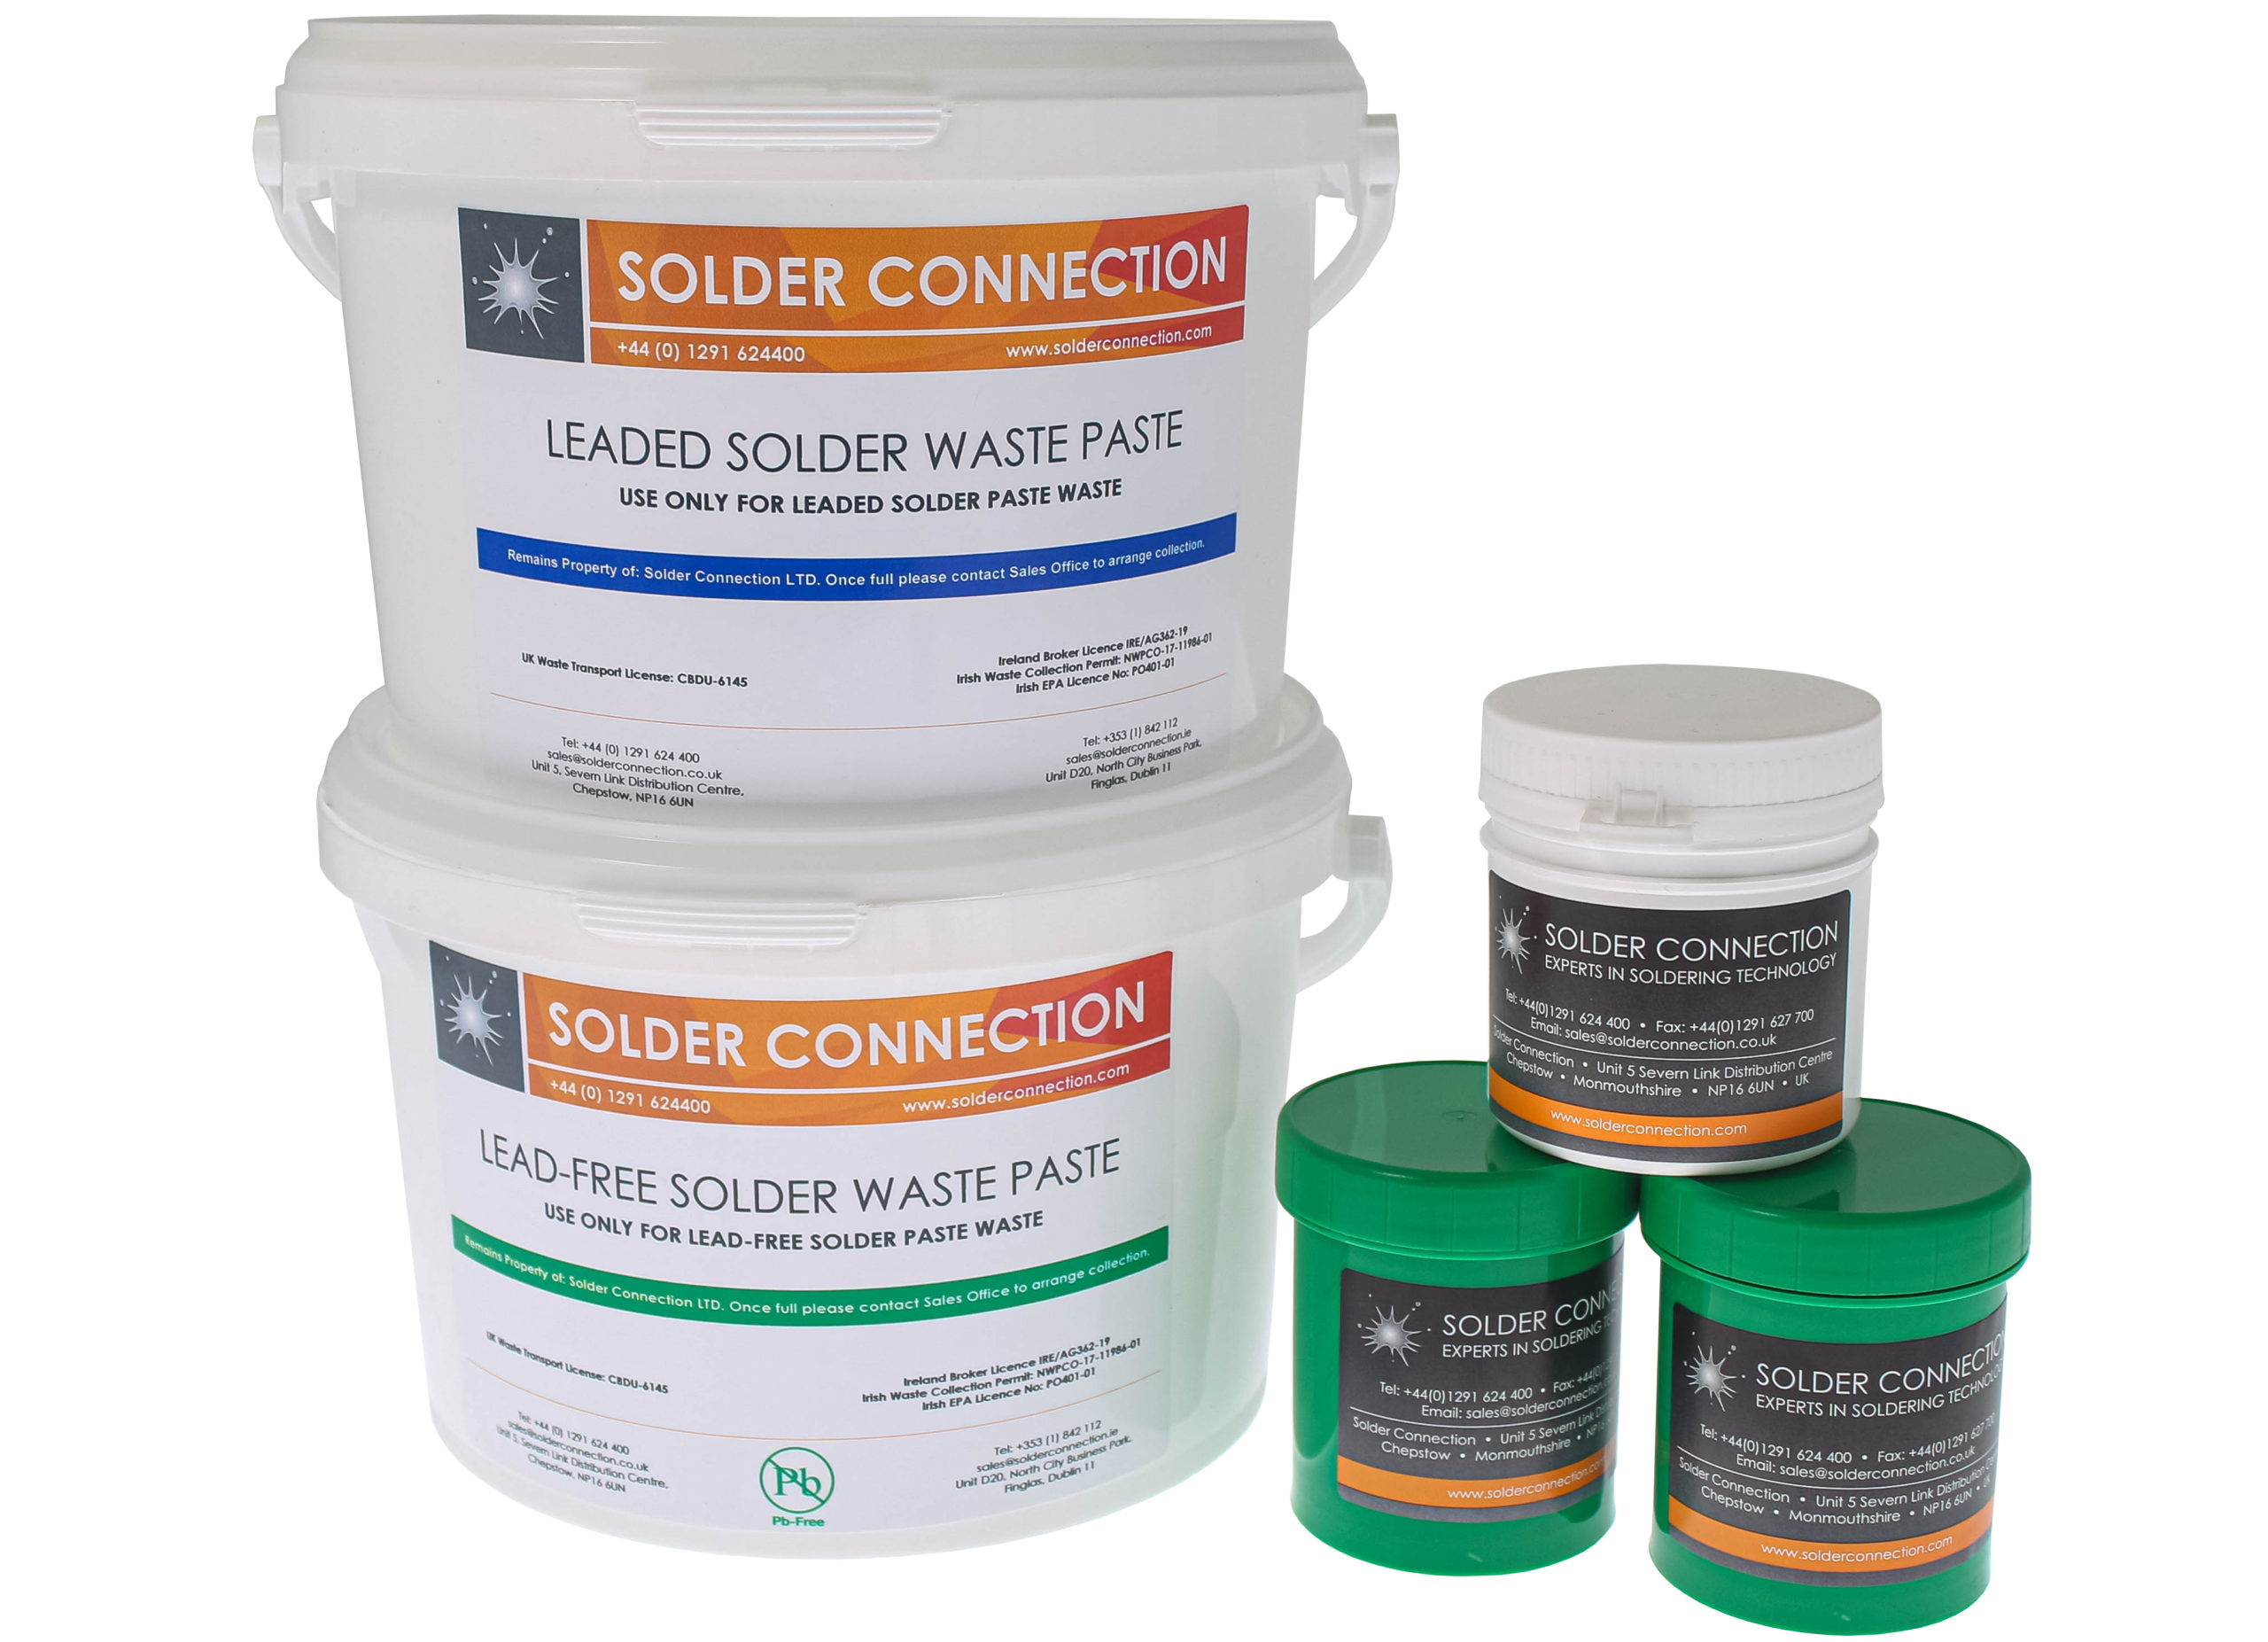 Solder Recycling Services Paste Collection Group